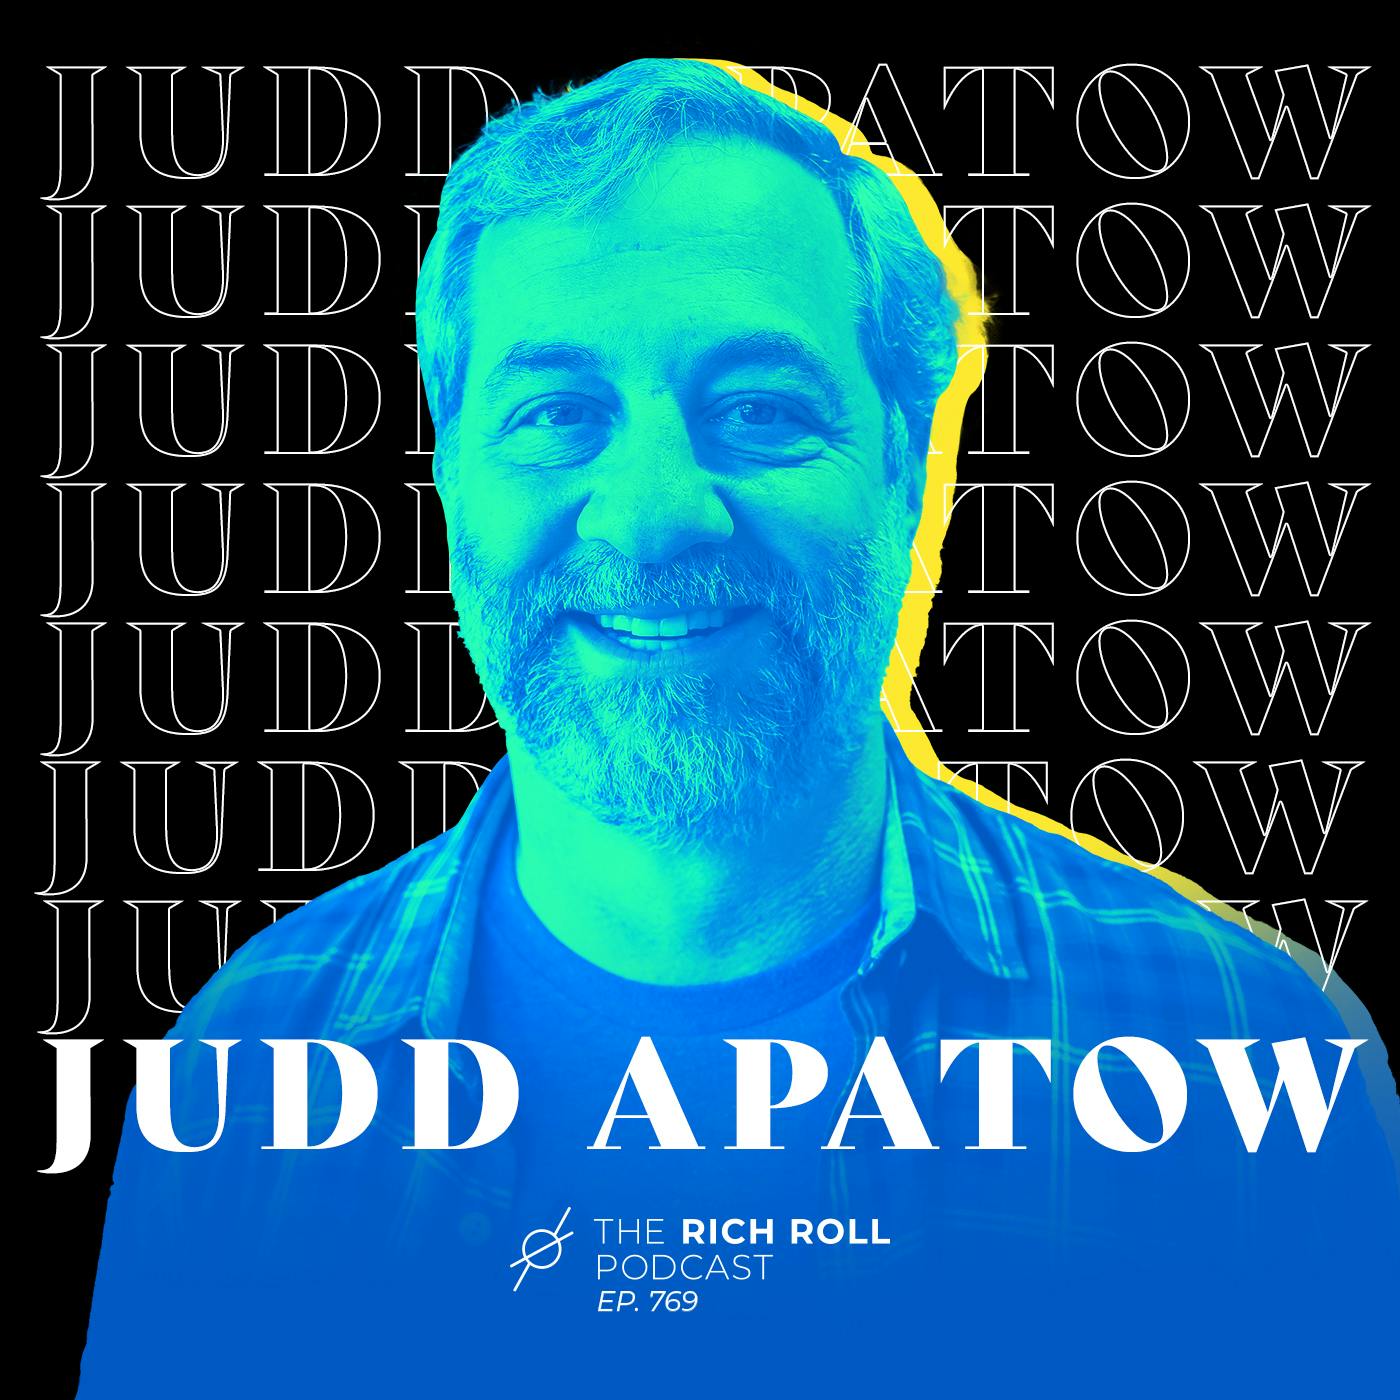 Judd Apatow On Comedy, Creativity, And Embracing Your Inner Weirdo